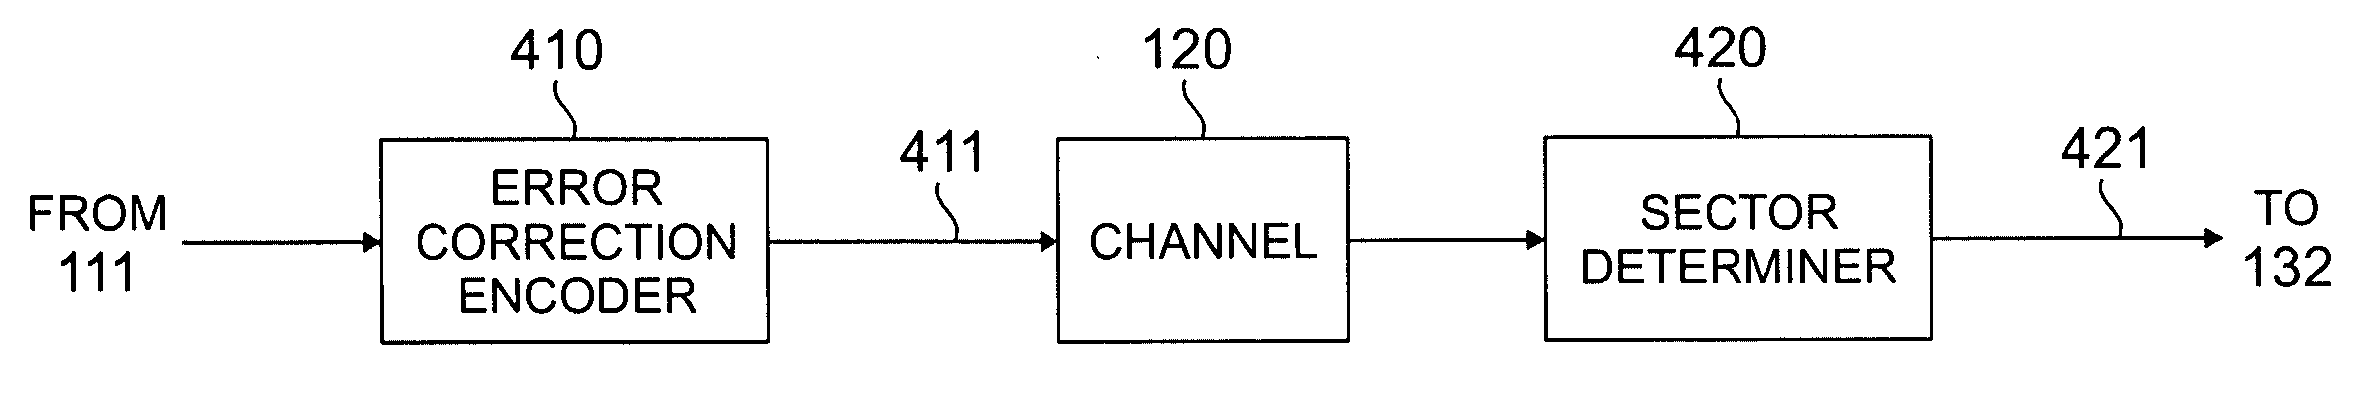 Apparatus and method for using an error correcting code to achieve data compression in a data communication network